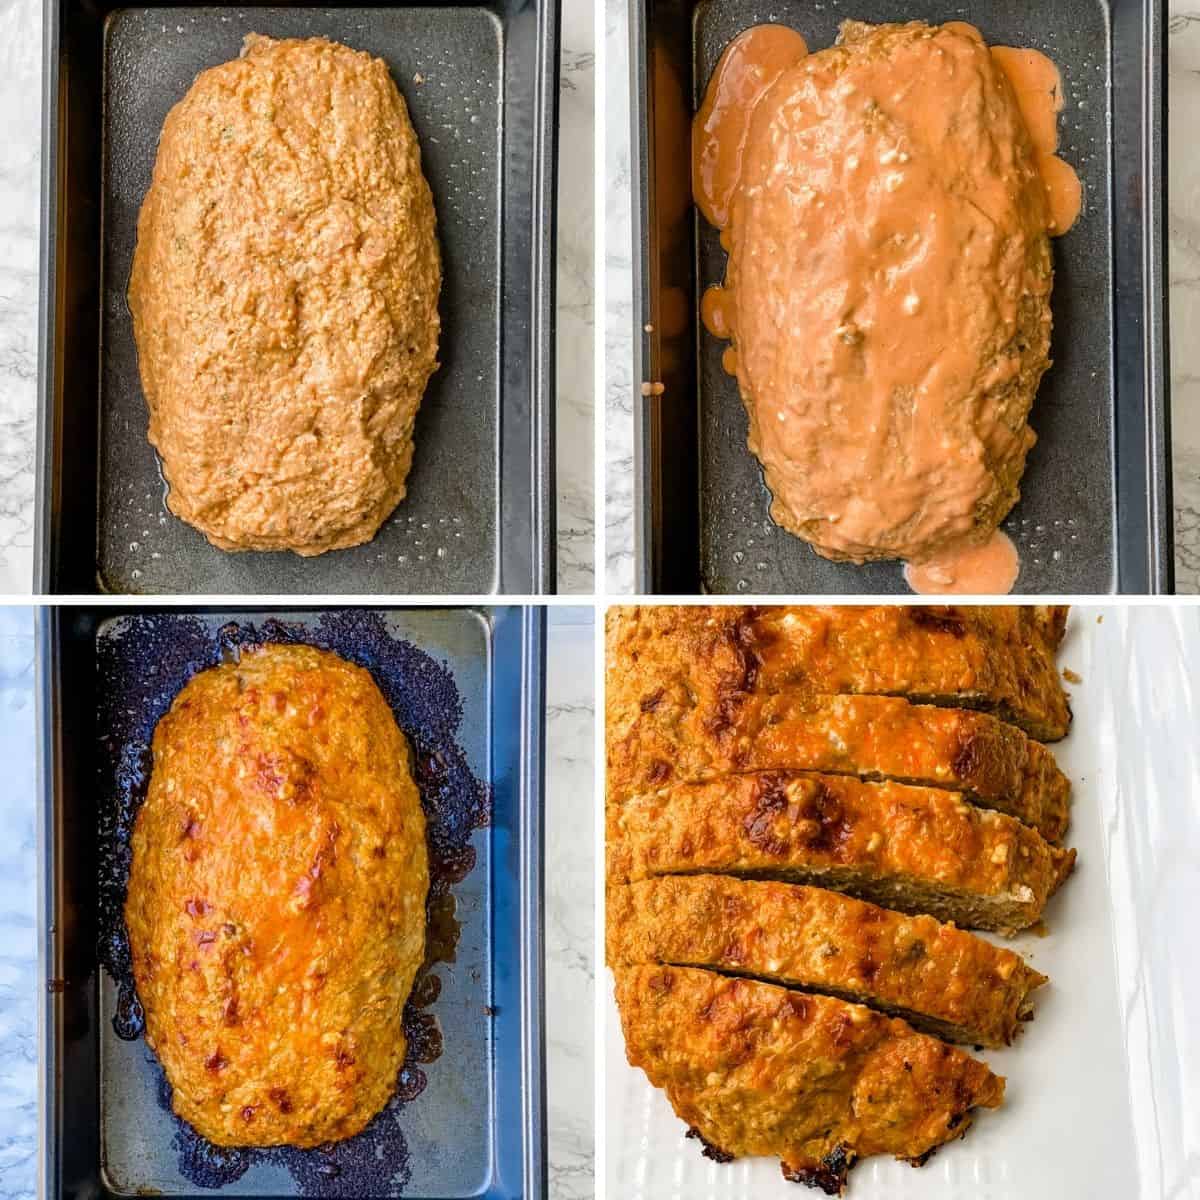 Another collage shows the final steps of making a buffalo chicken taco.